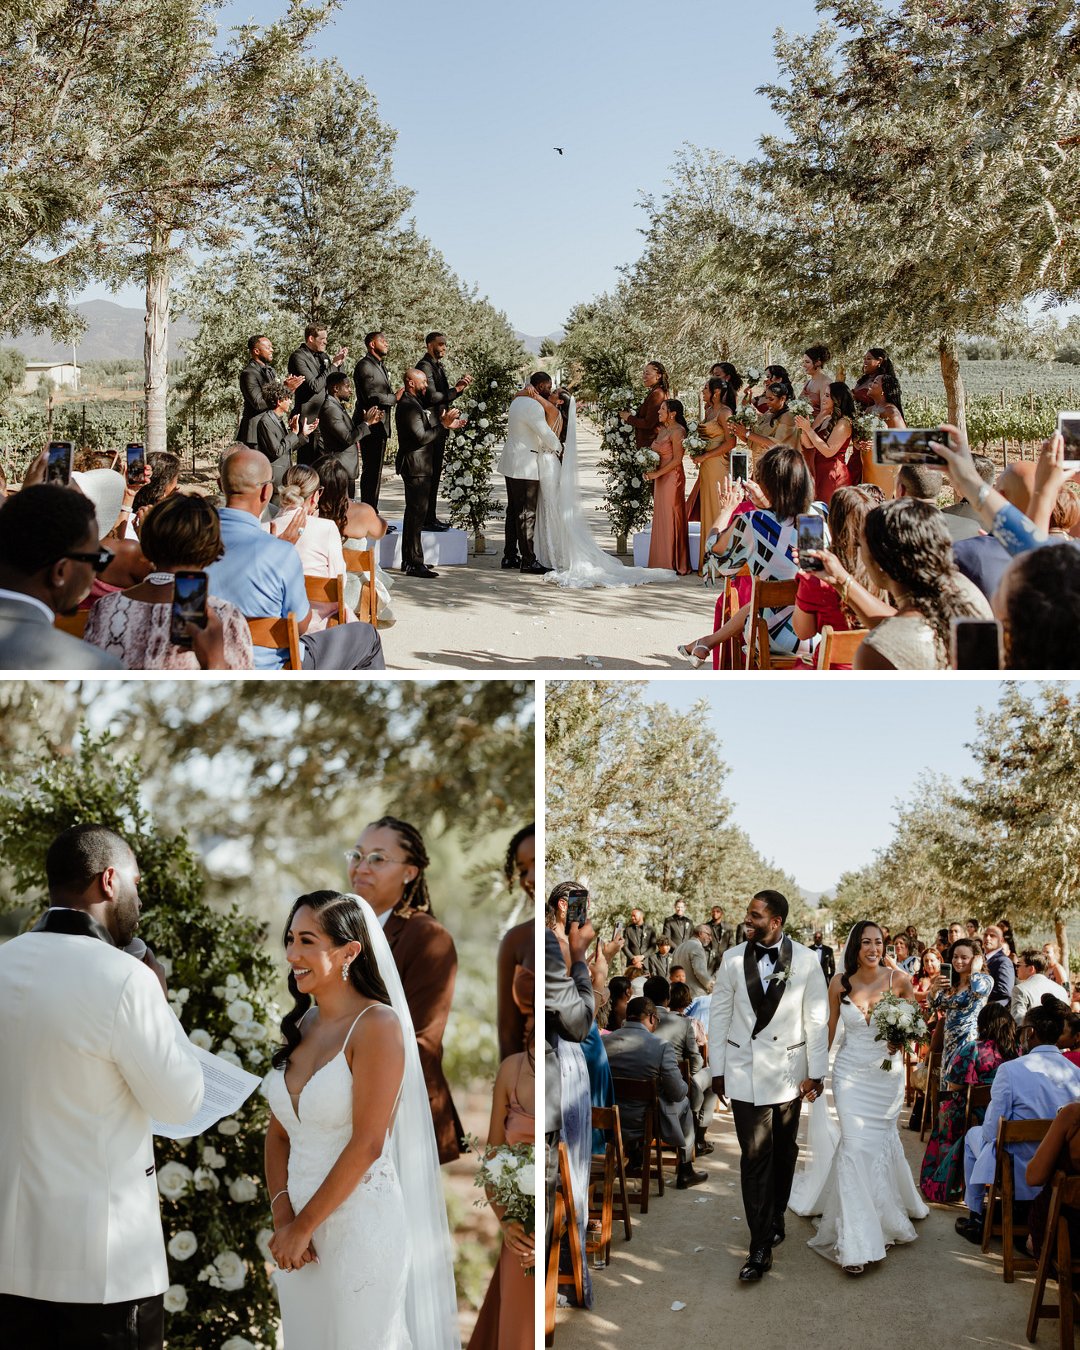 couple kiss at vineyard wedding altar, then walk back hand-in-hand smiling at guests